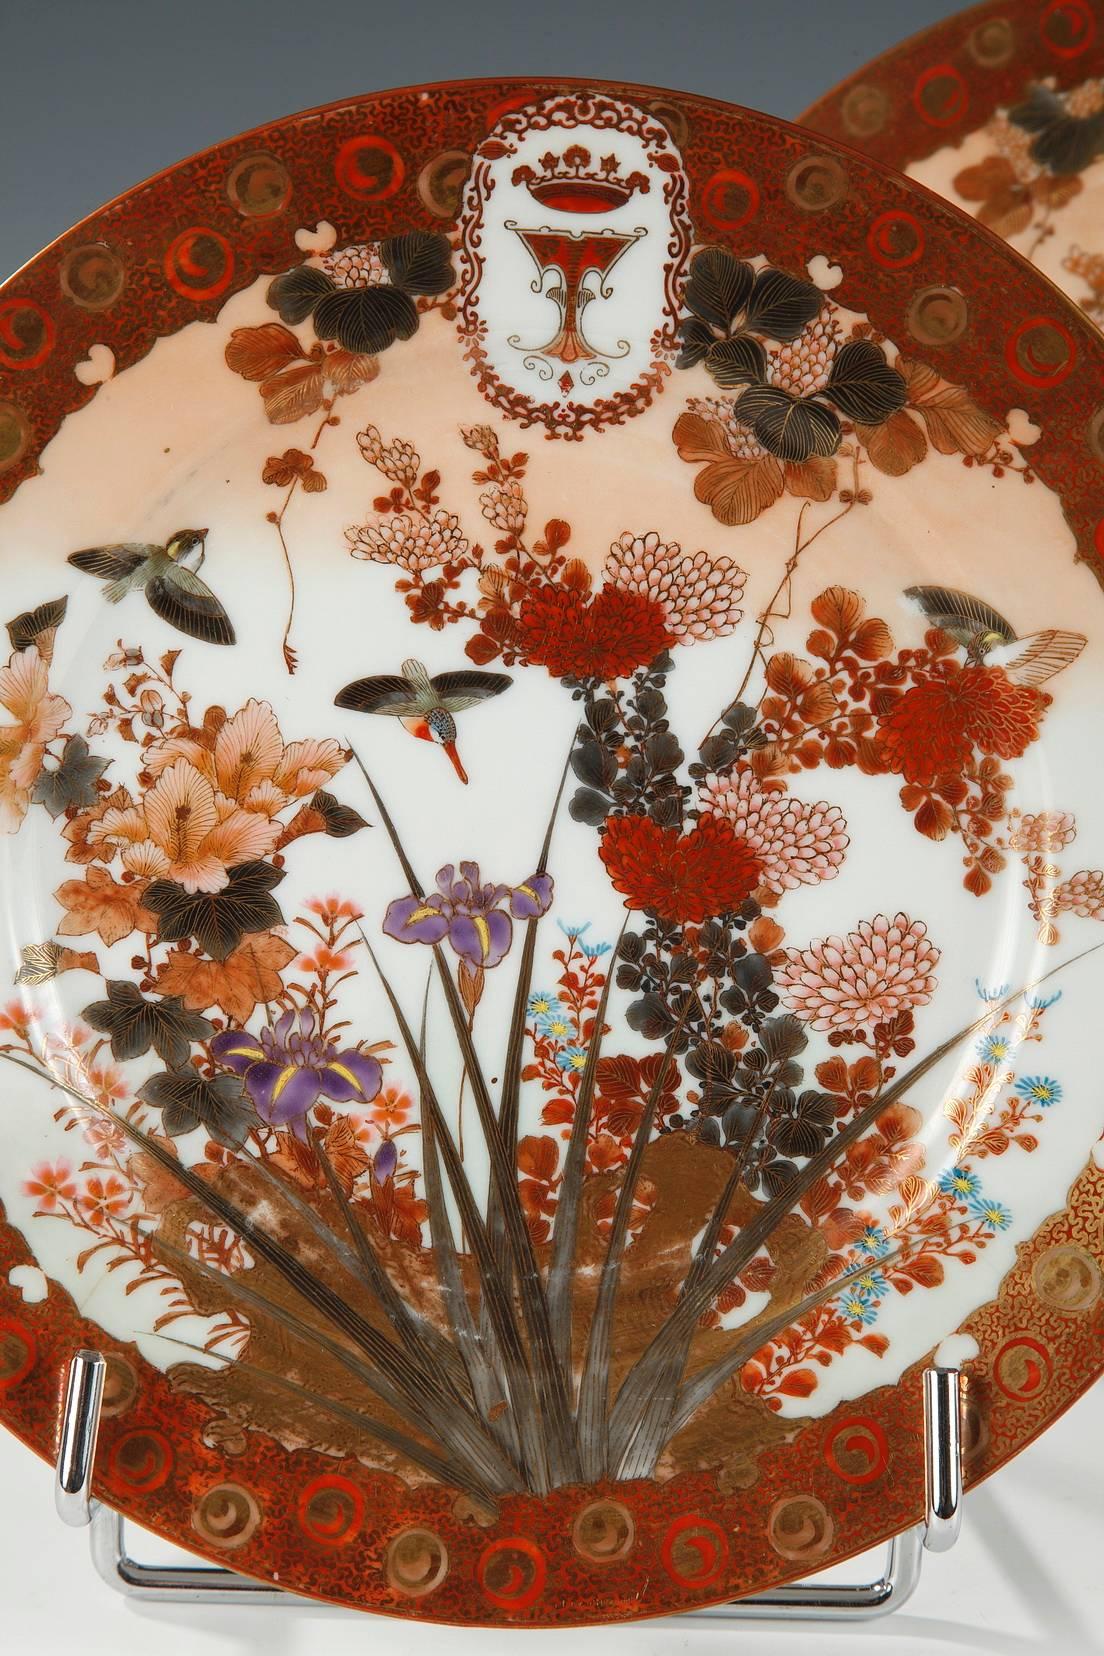 Lovely part of Imari porcelain table service, made for the European market in Japan. 
Iris, Japanese chrysanthemum, cap’s daisies, vine leaves, and small birds, create a rich purple and pink shades floral décor, all of which is circled by a gold